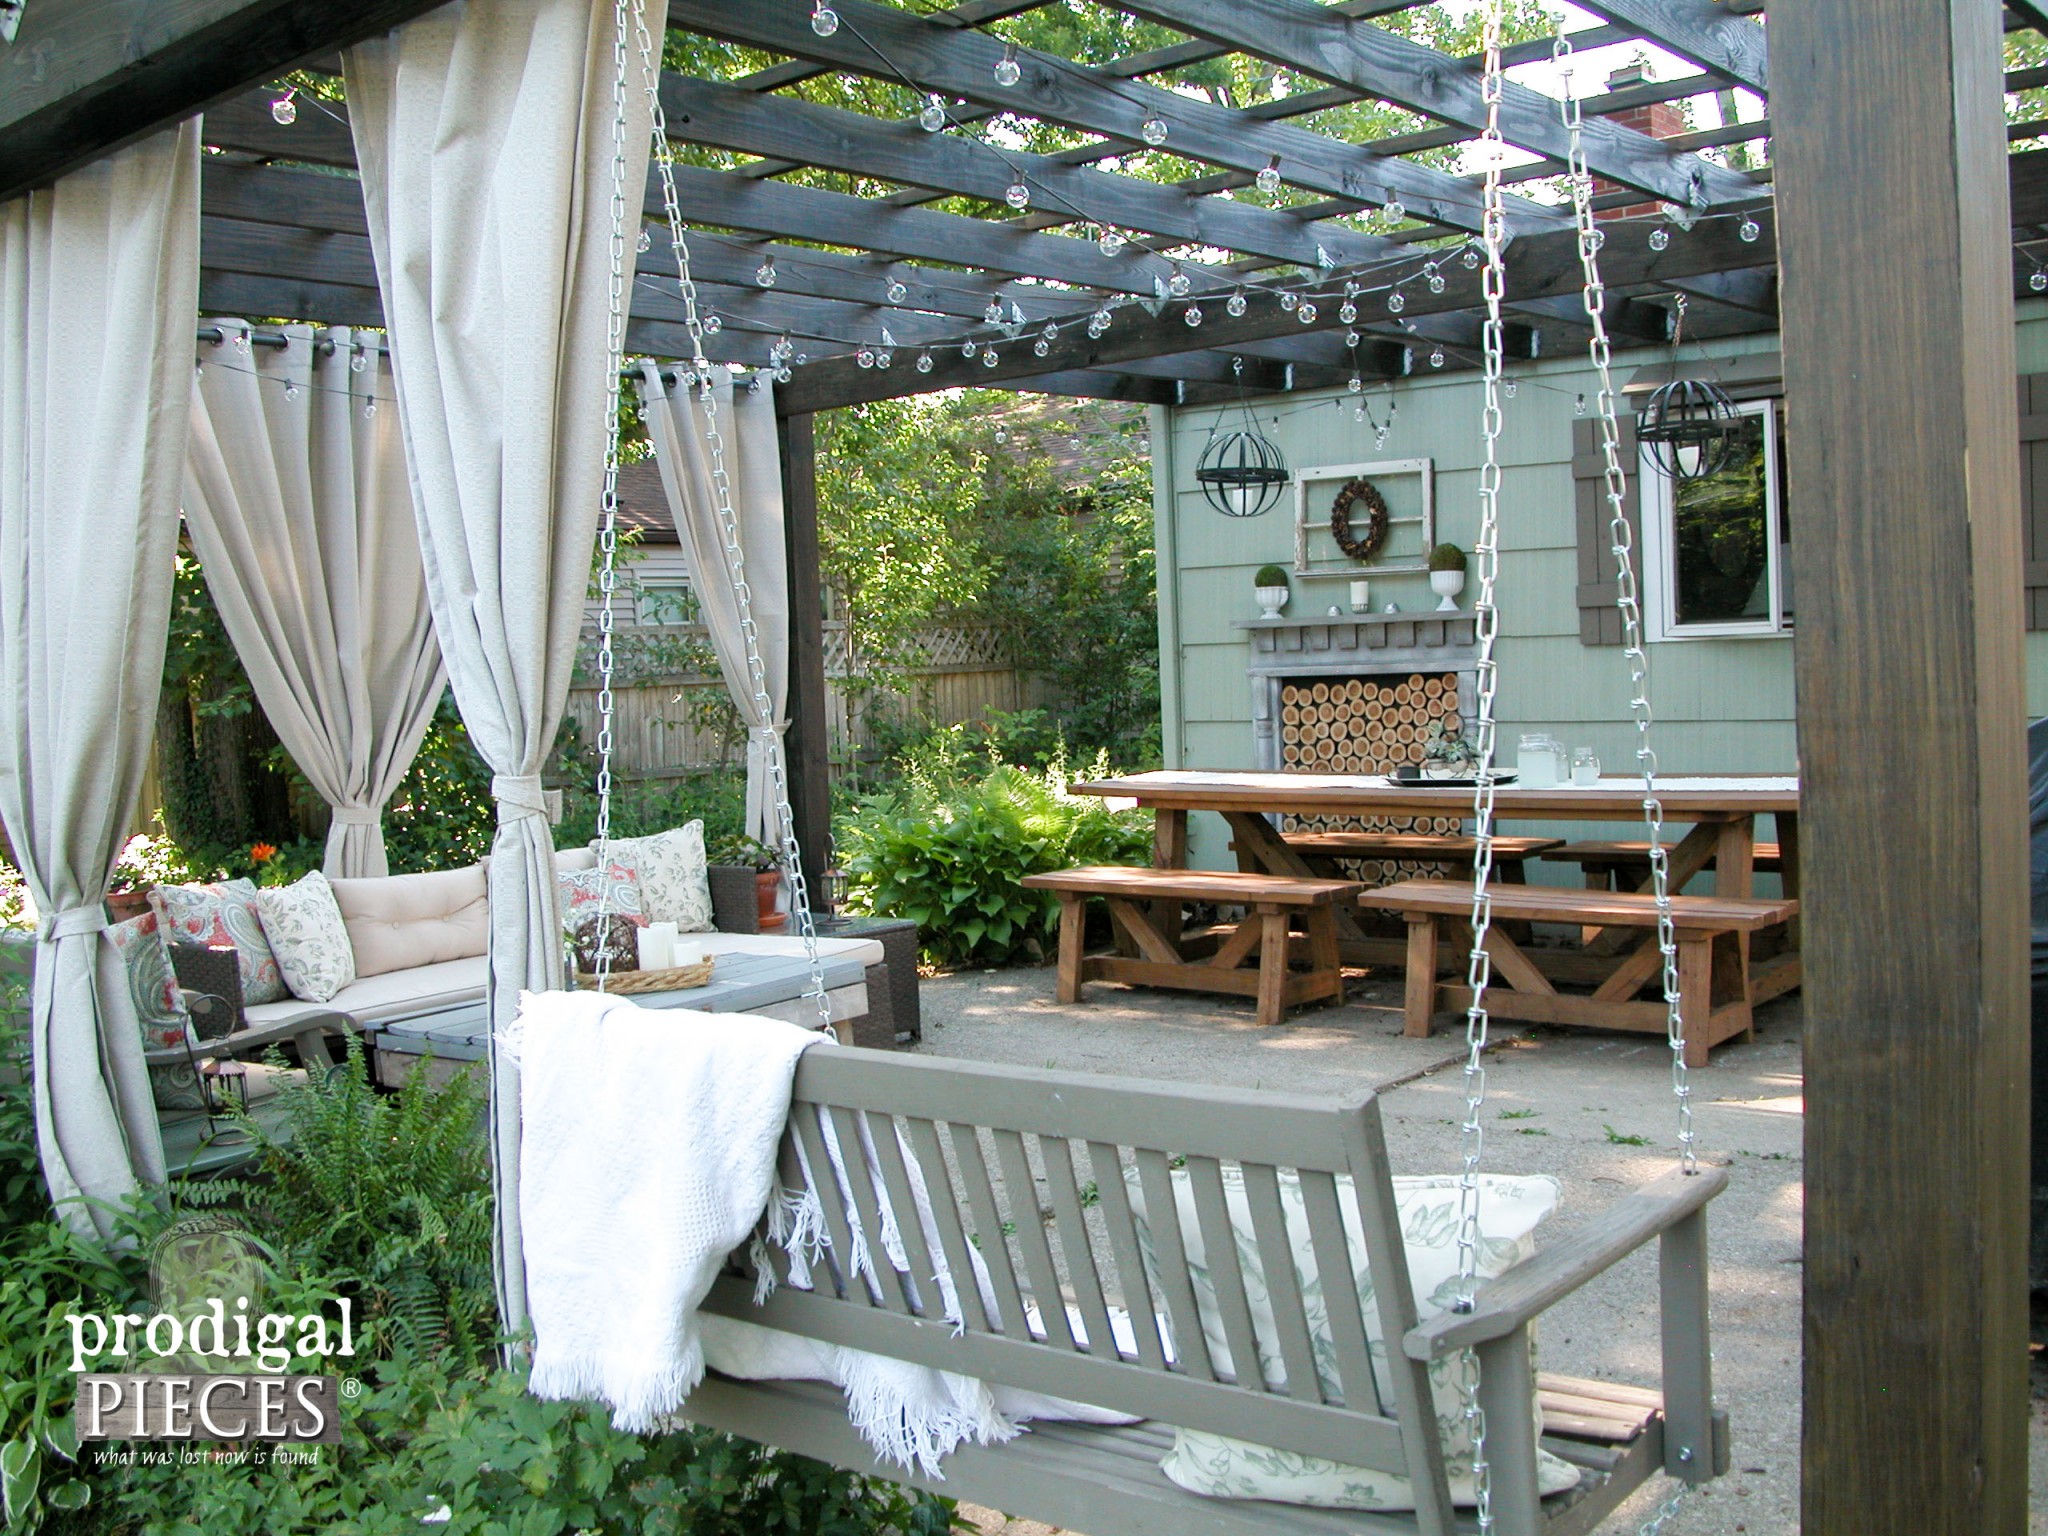 Rustic Patio with DIY Pergola, Dining, and Entertaining Area by Prodigal Pieces | www.prodigalpieces.com